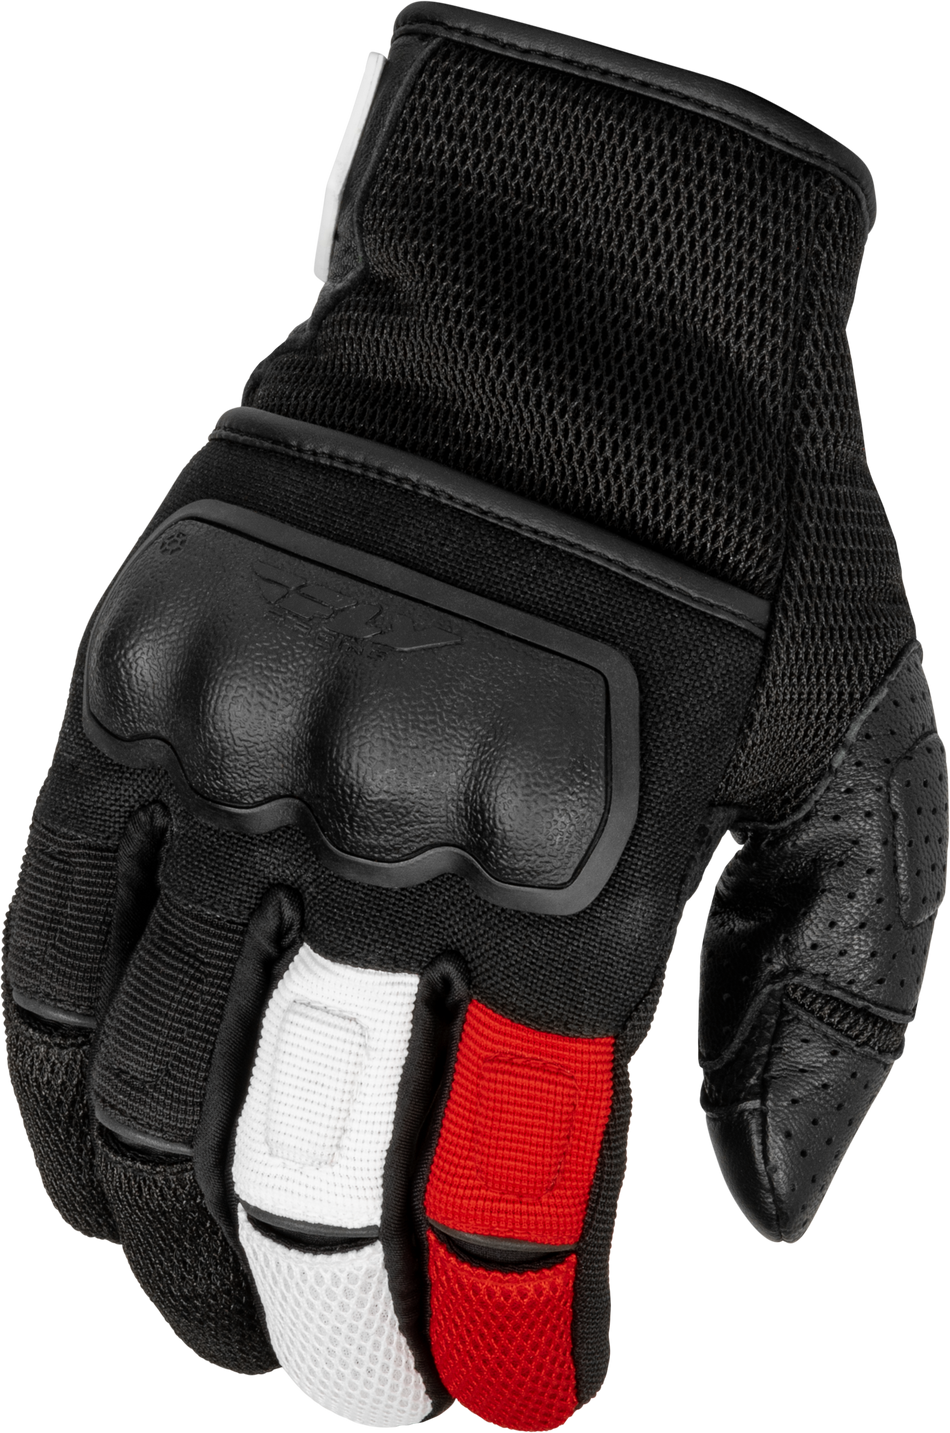 FLY RACING Coolpro Force Gloves Black/White/Red Lg 476-4127L